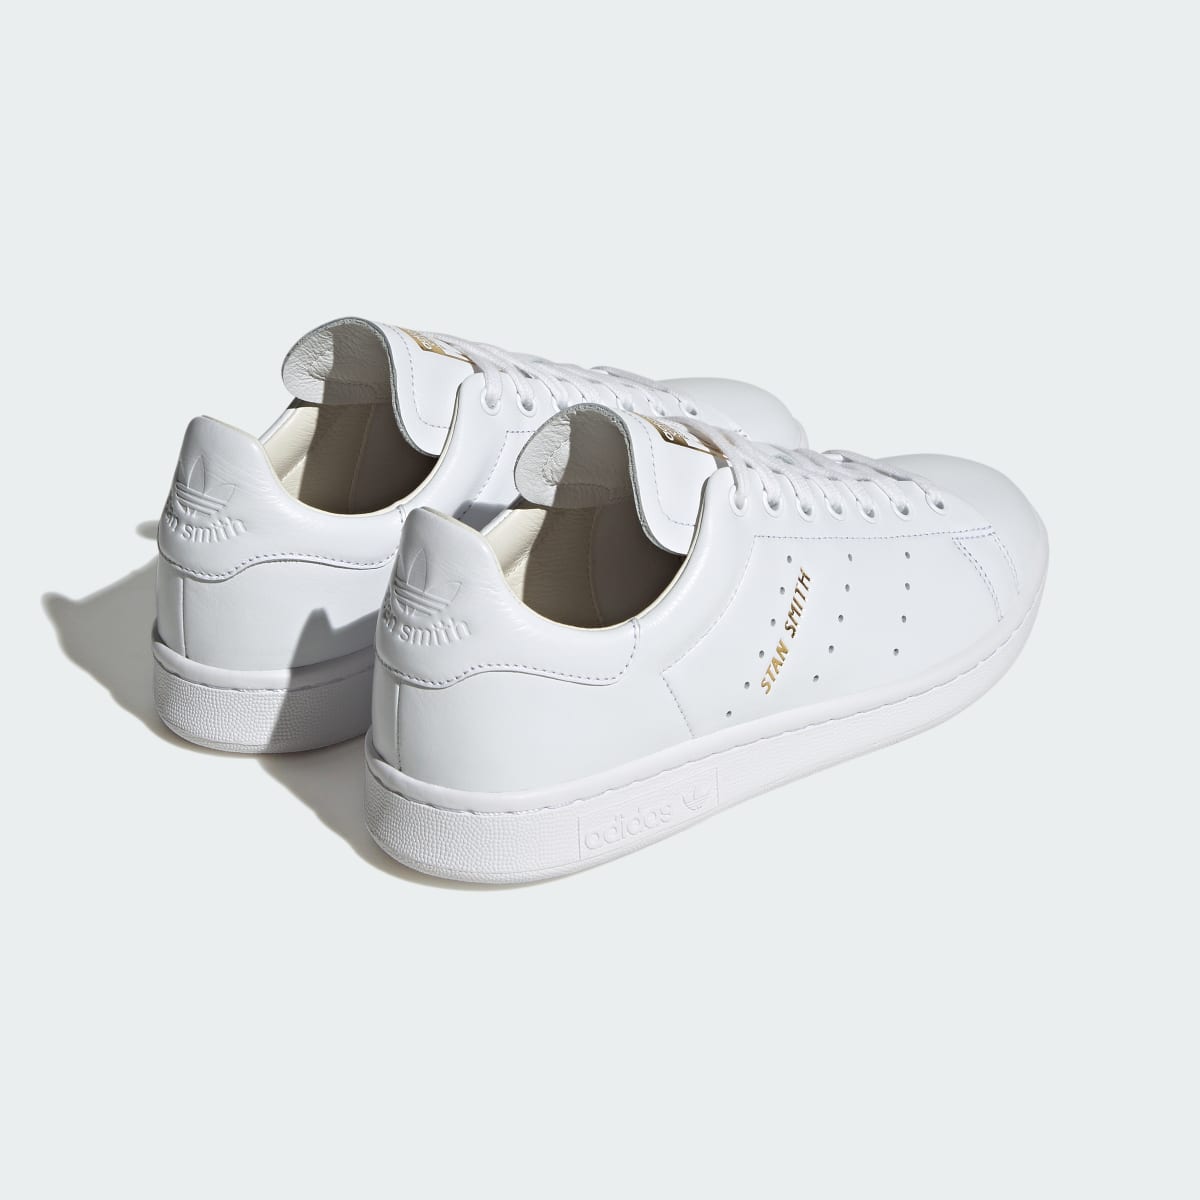 Adidas Chaussure Stan Smith Luxe. 7